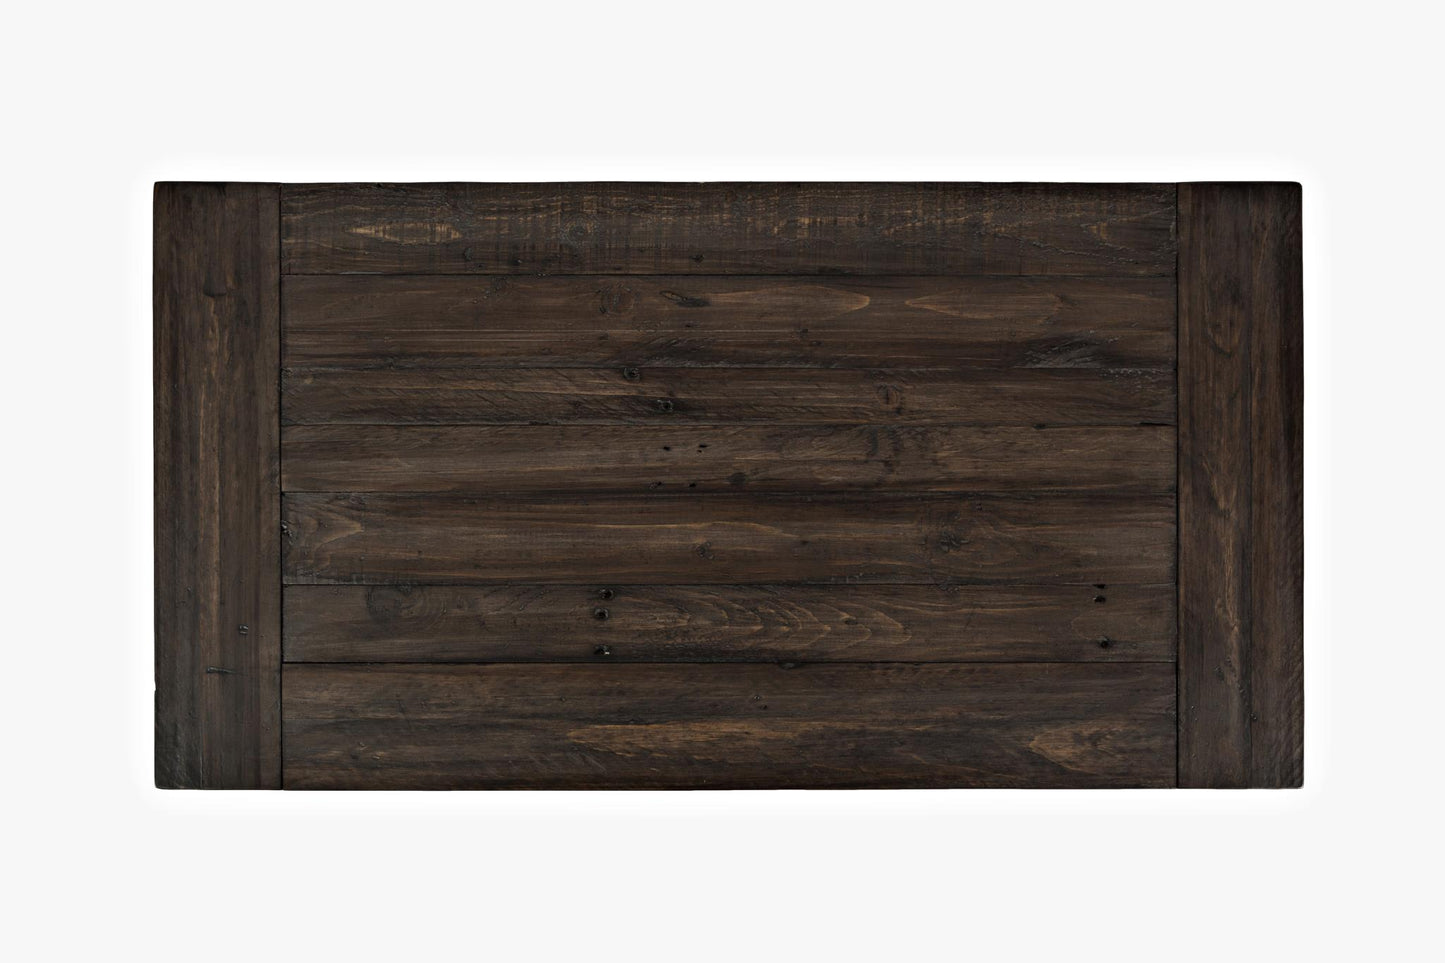 Madison County 32in Barn Door Accent Cabinet Vintage Black